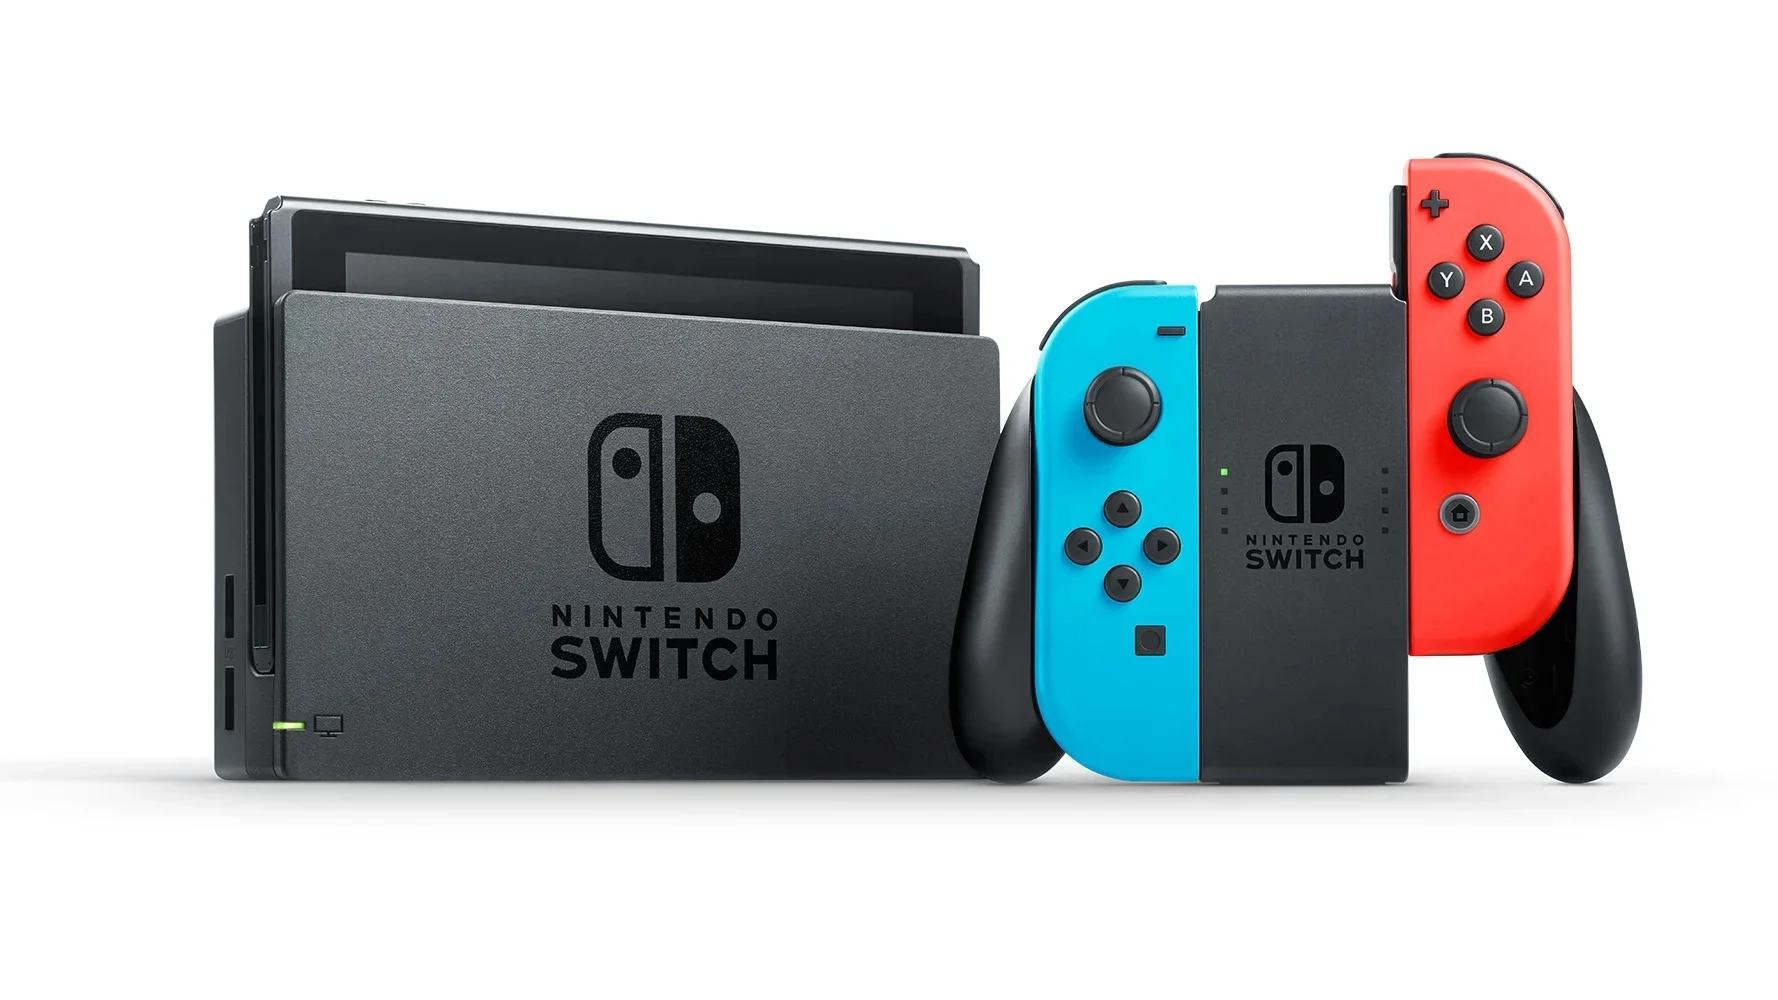 Nintendo sold a staggering 4.2 million Switches in March, in spite of shortages